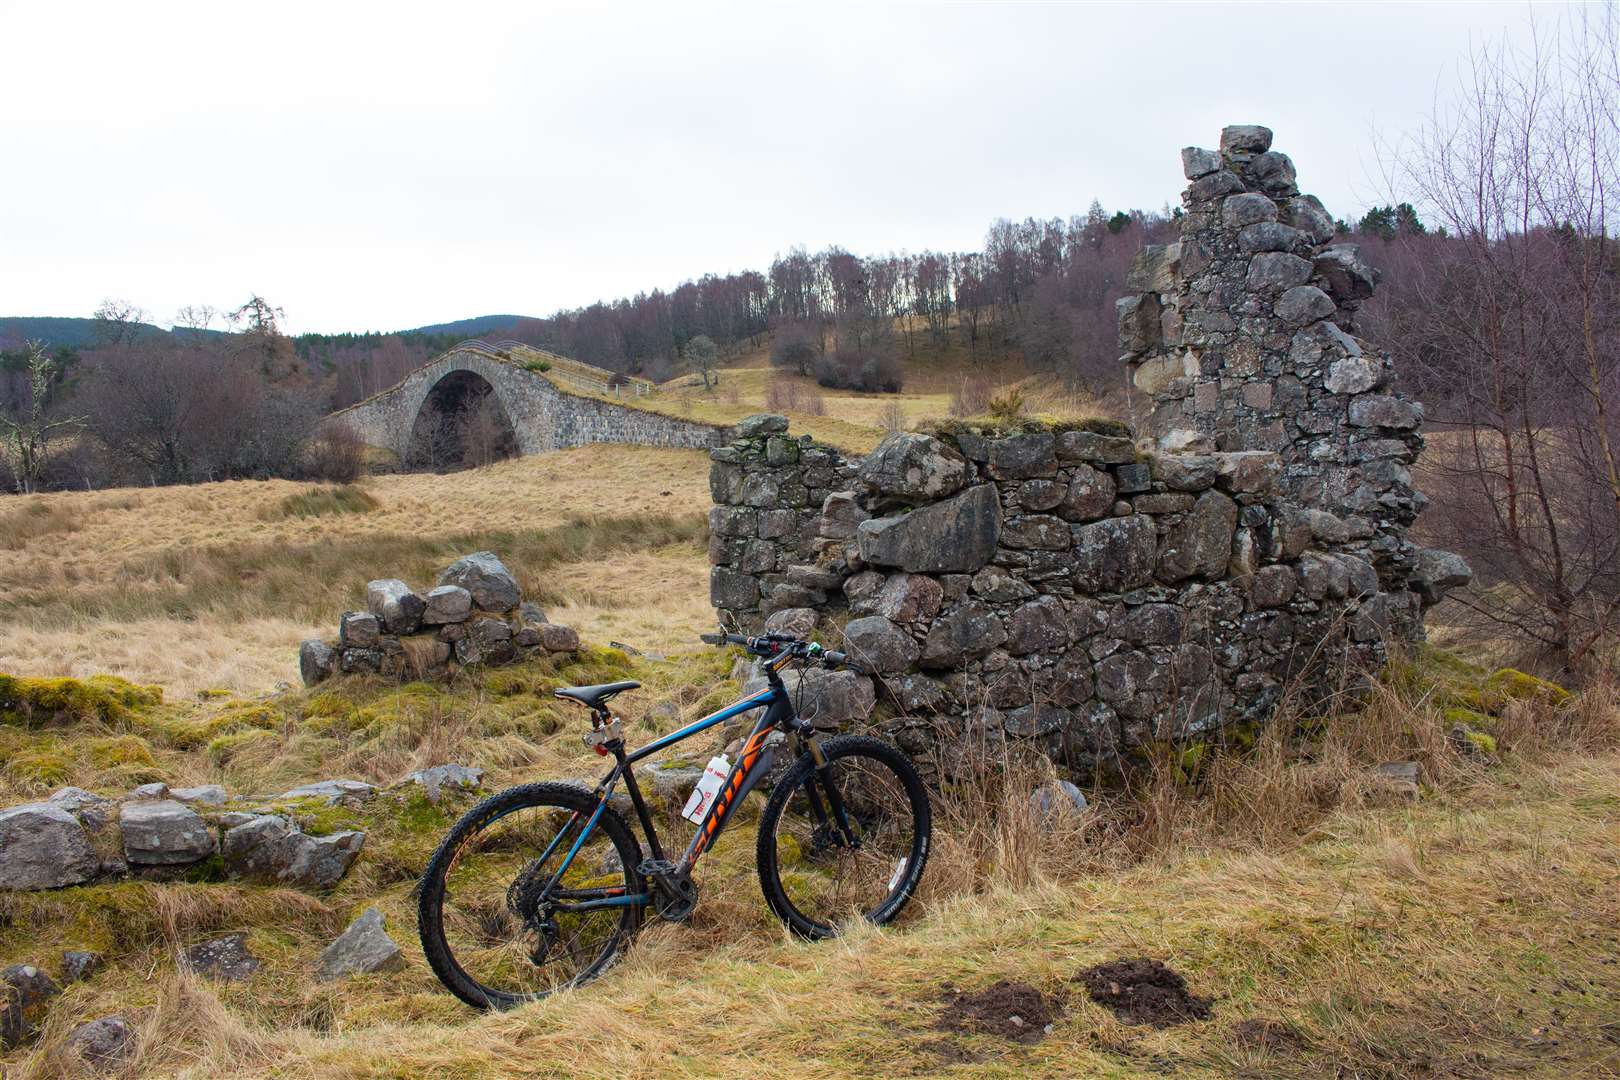 Sluggan Bridge, seen from the nearby ruin, is part of the National Cycle Network.